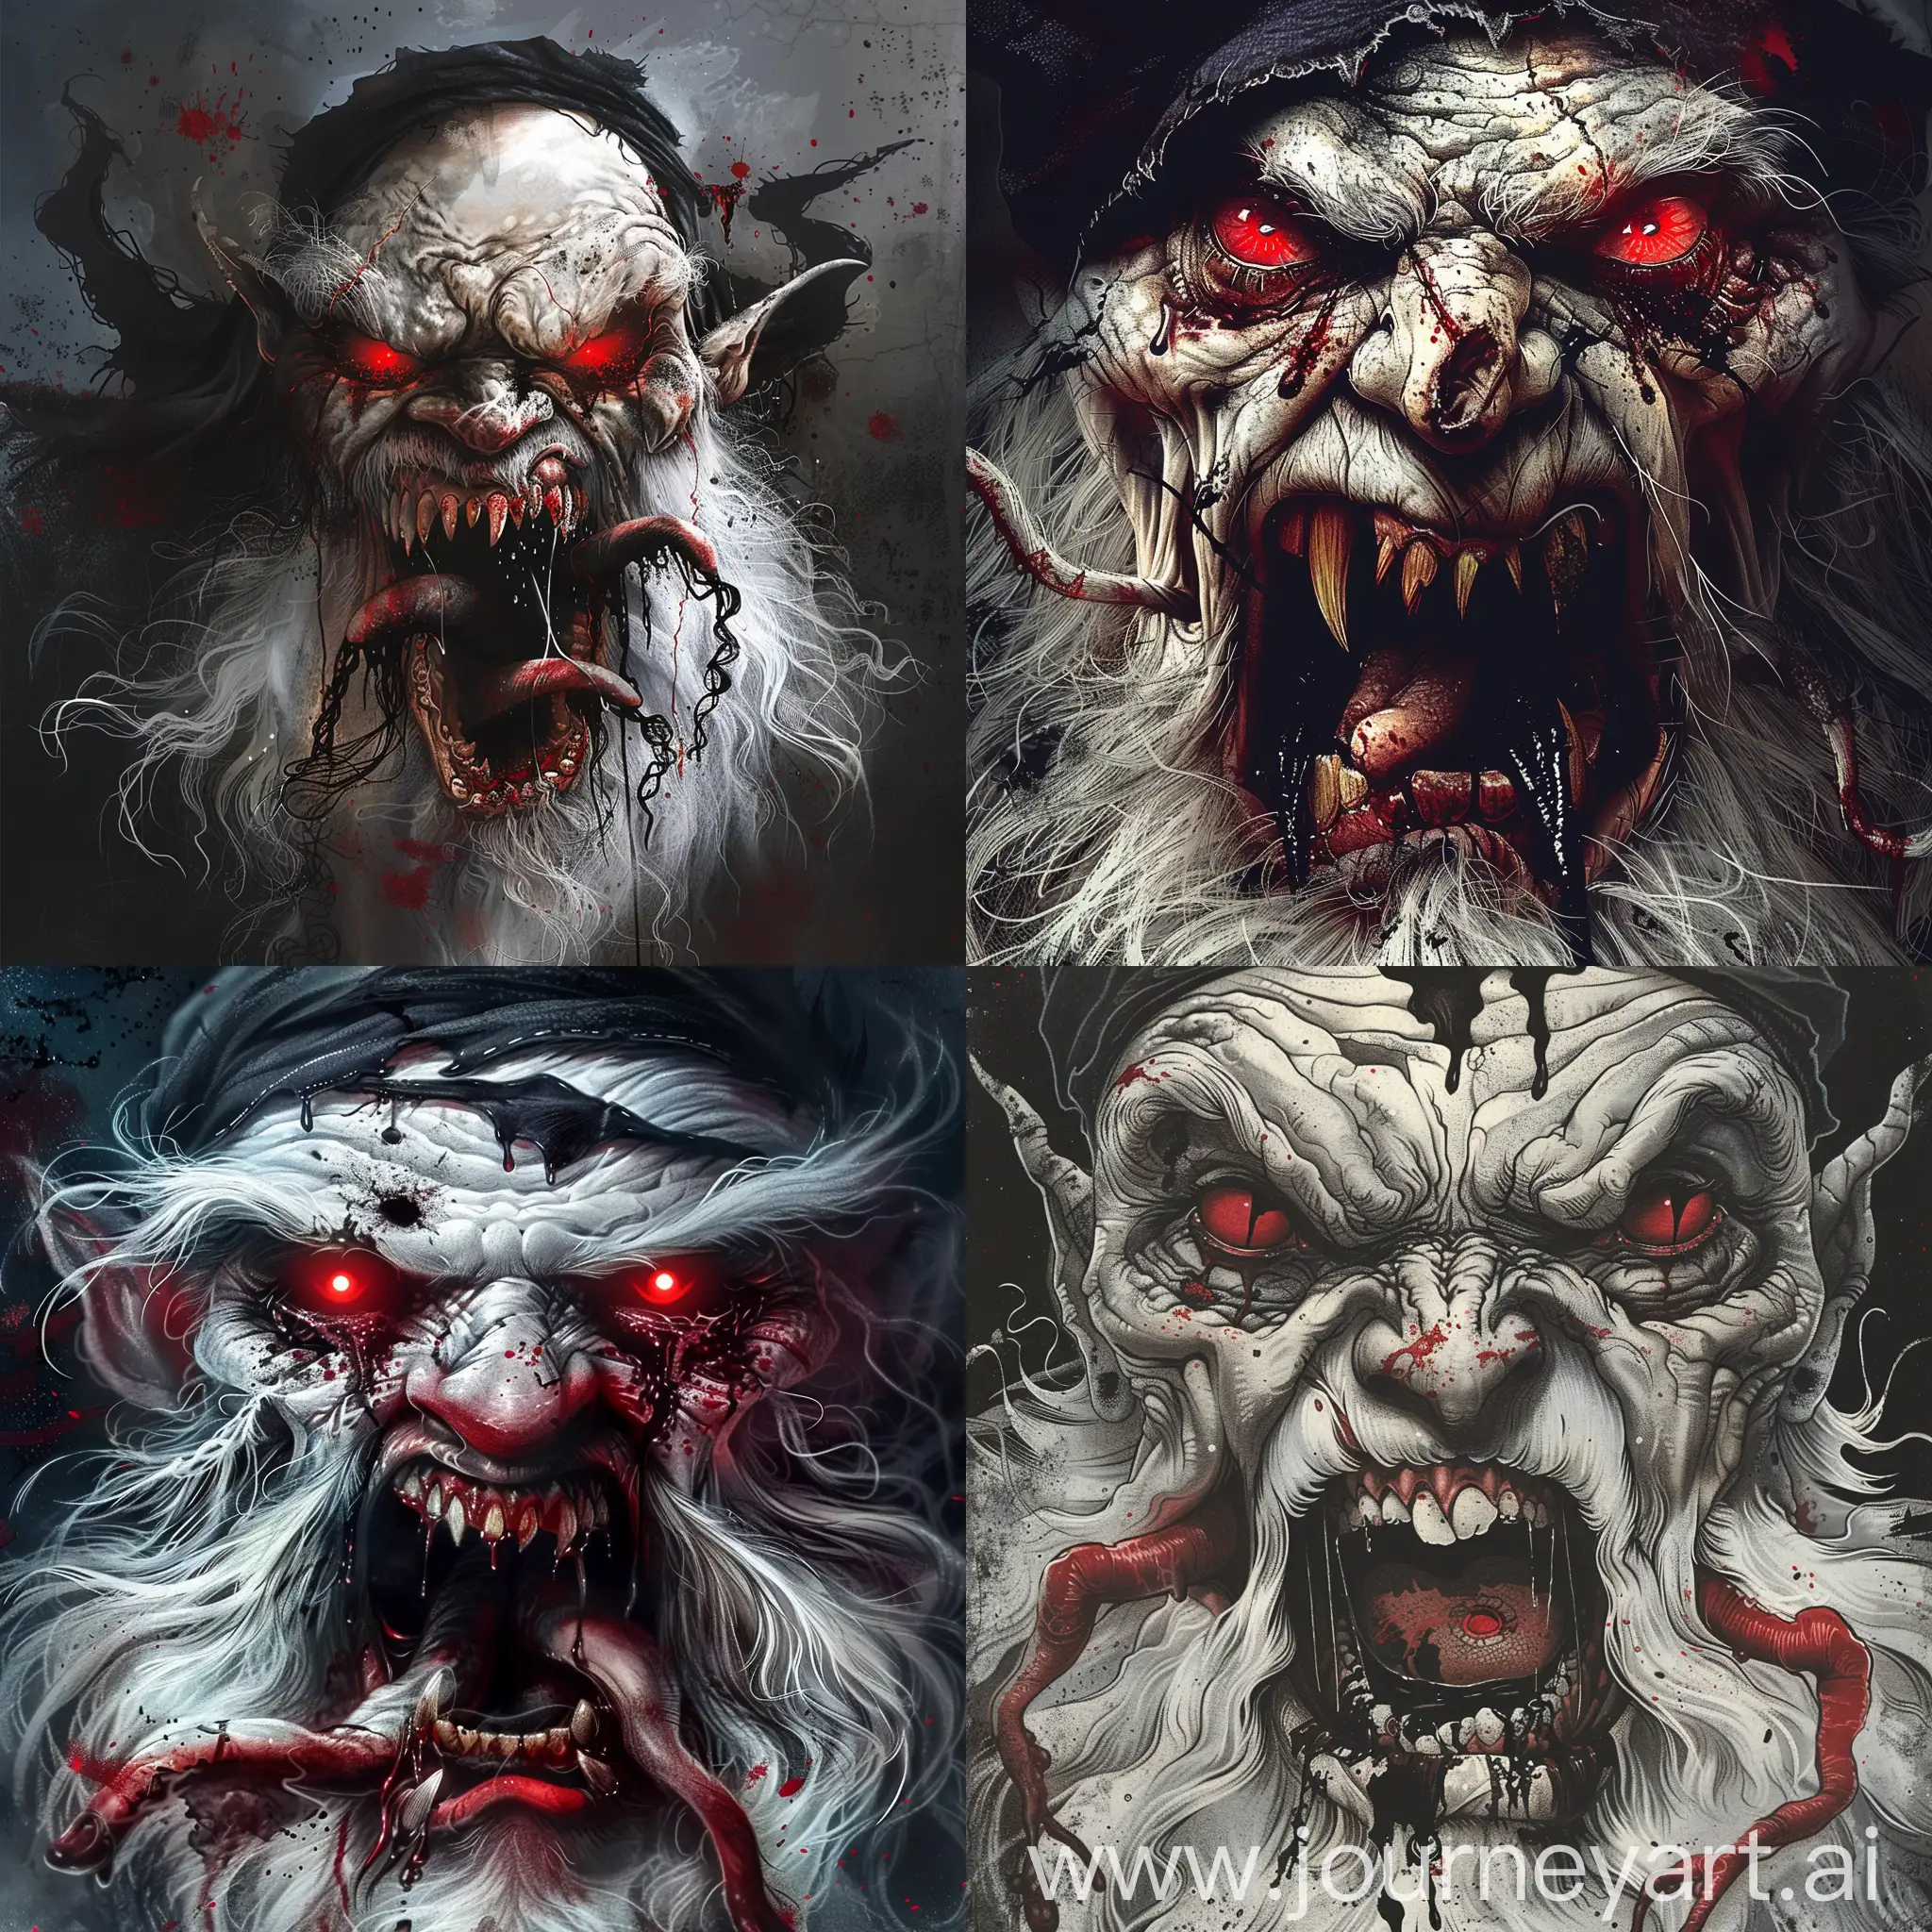 A very scary evil creature with a white and gray face and red eyes that can be seen with red light, like a bat in the dark and angry with an open mouth while three tongues are sticking out of his mouth and he has a black handkerchief tied around his head and a tangled white beard. Black blood spilled from his mouth on his ugly and white beard! He is very old